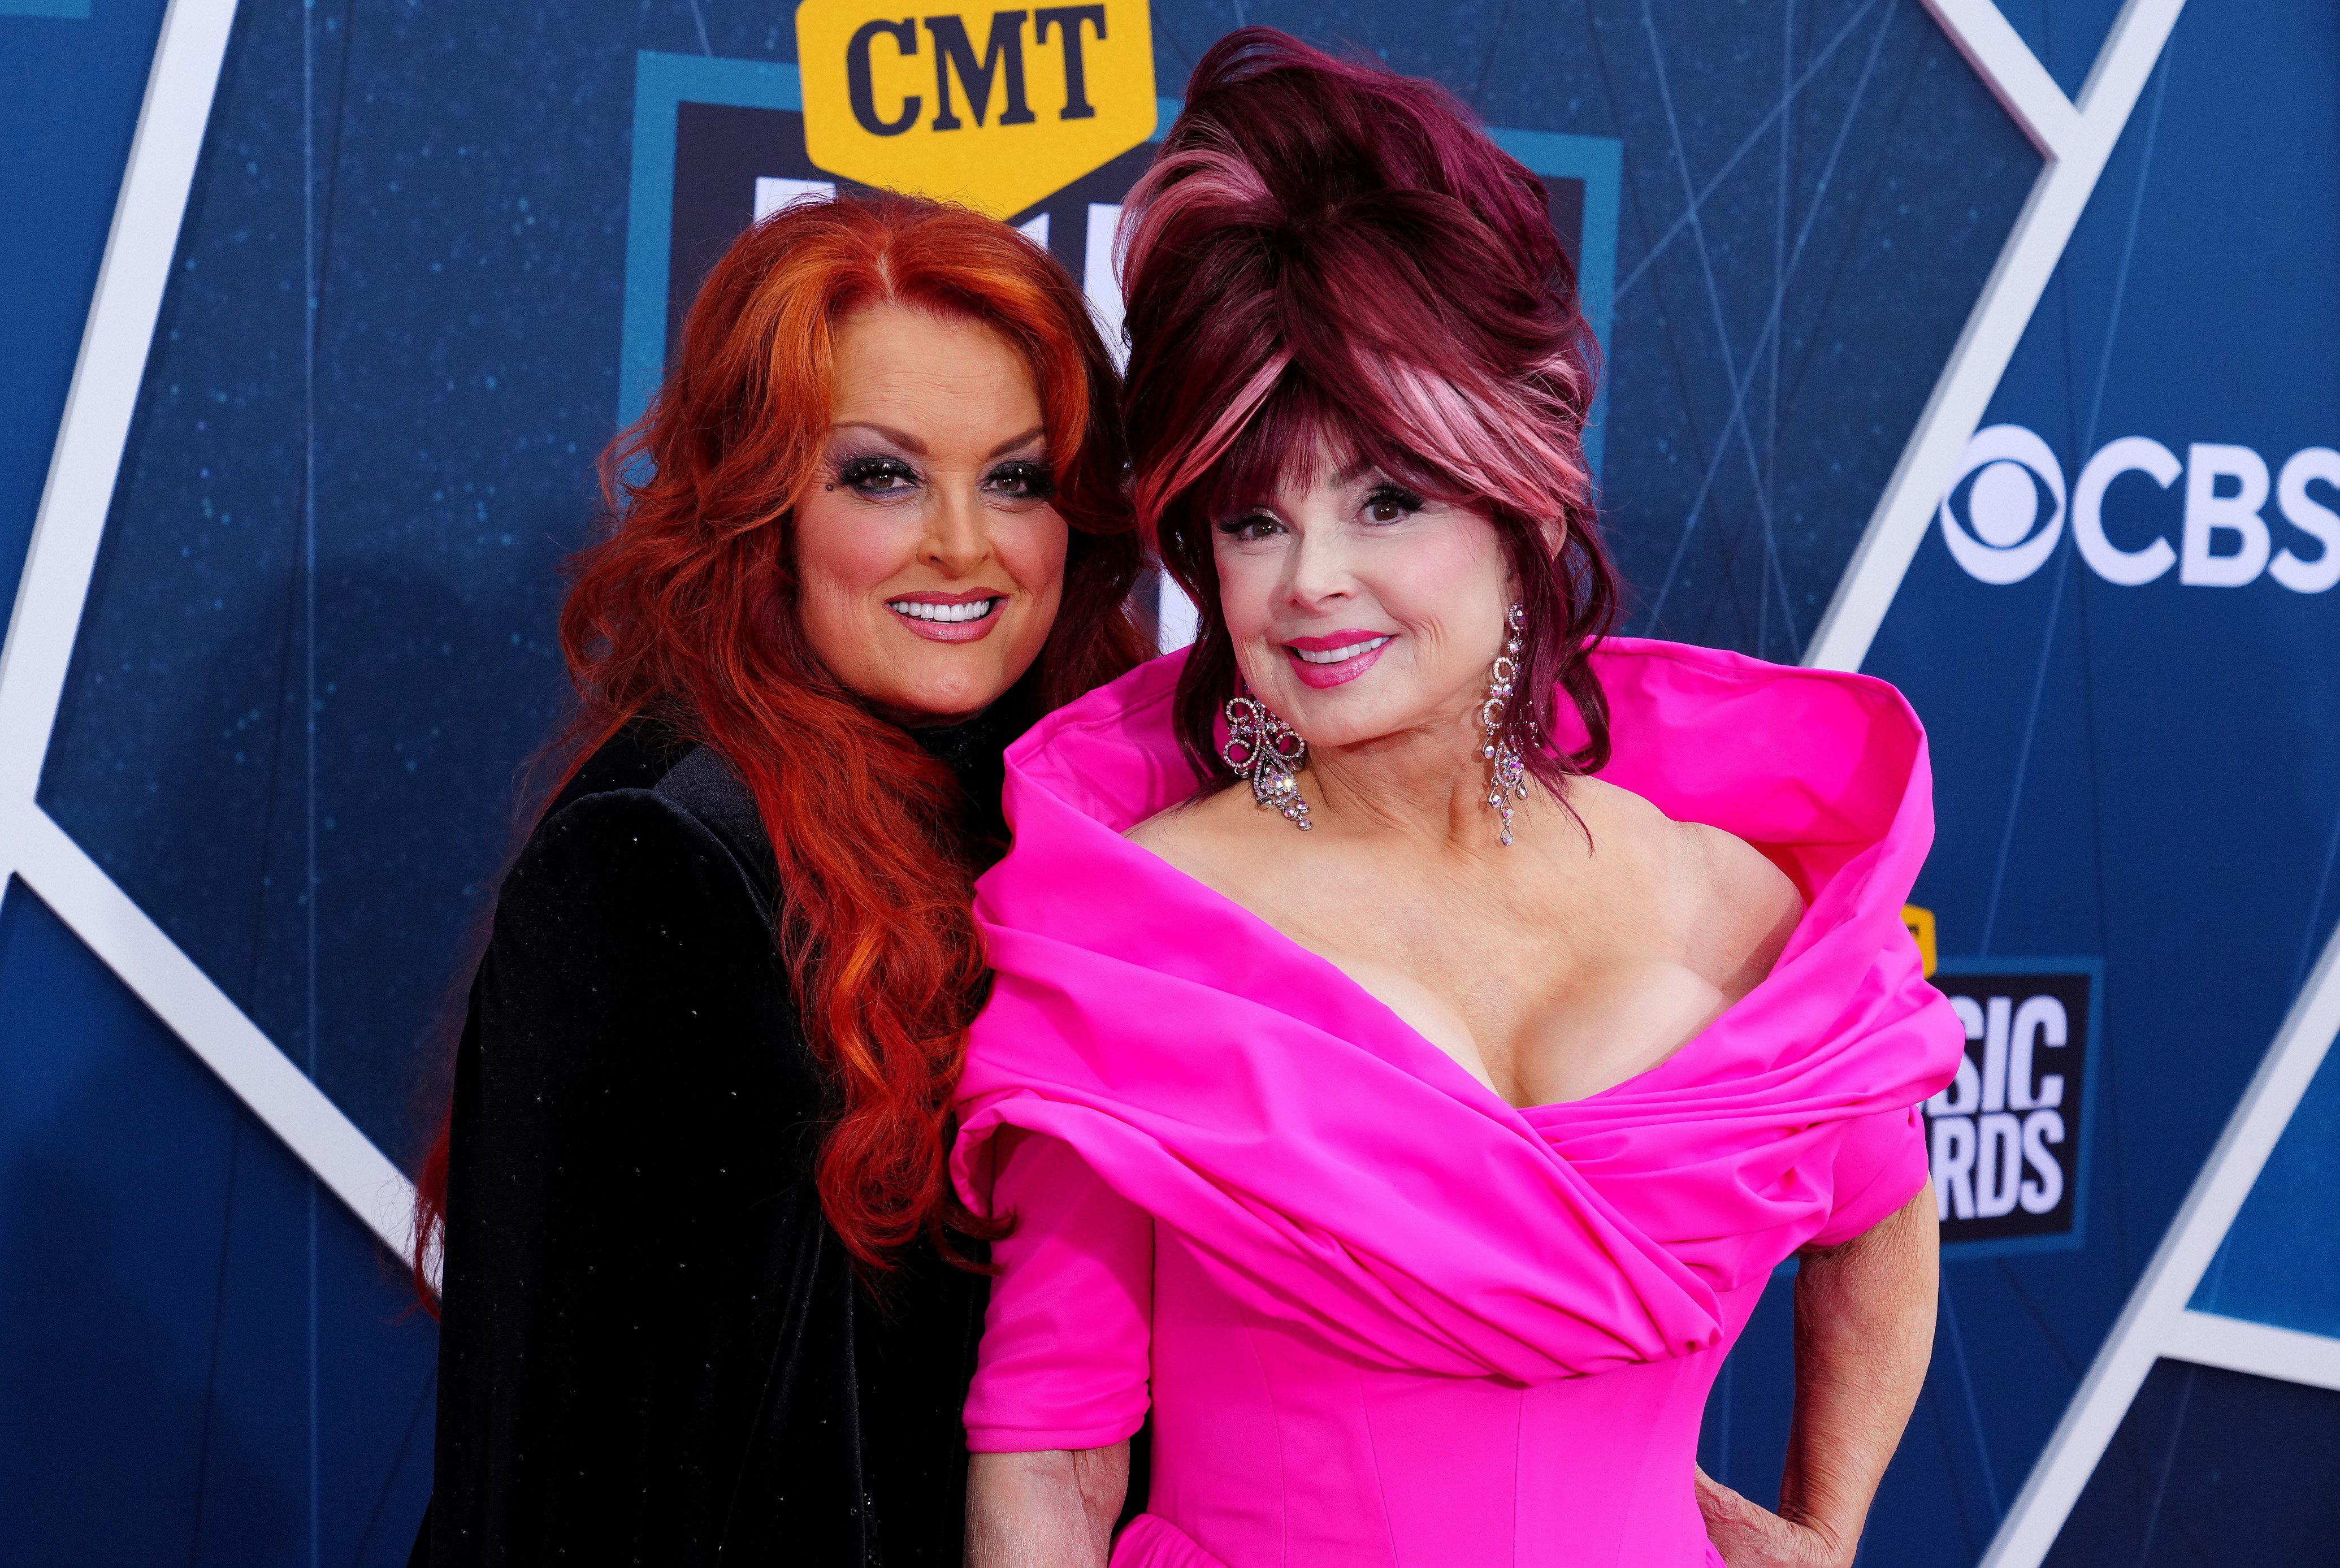 Wynonna Judd and Naomi Judd of The Judds attend the 2022 CMT Music Awards